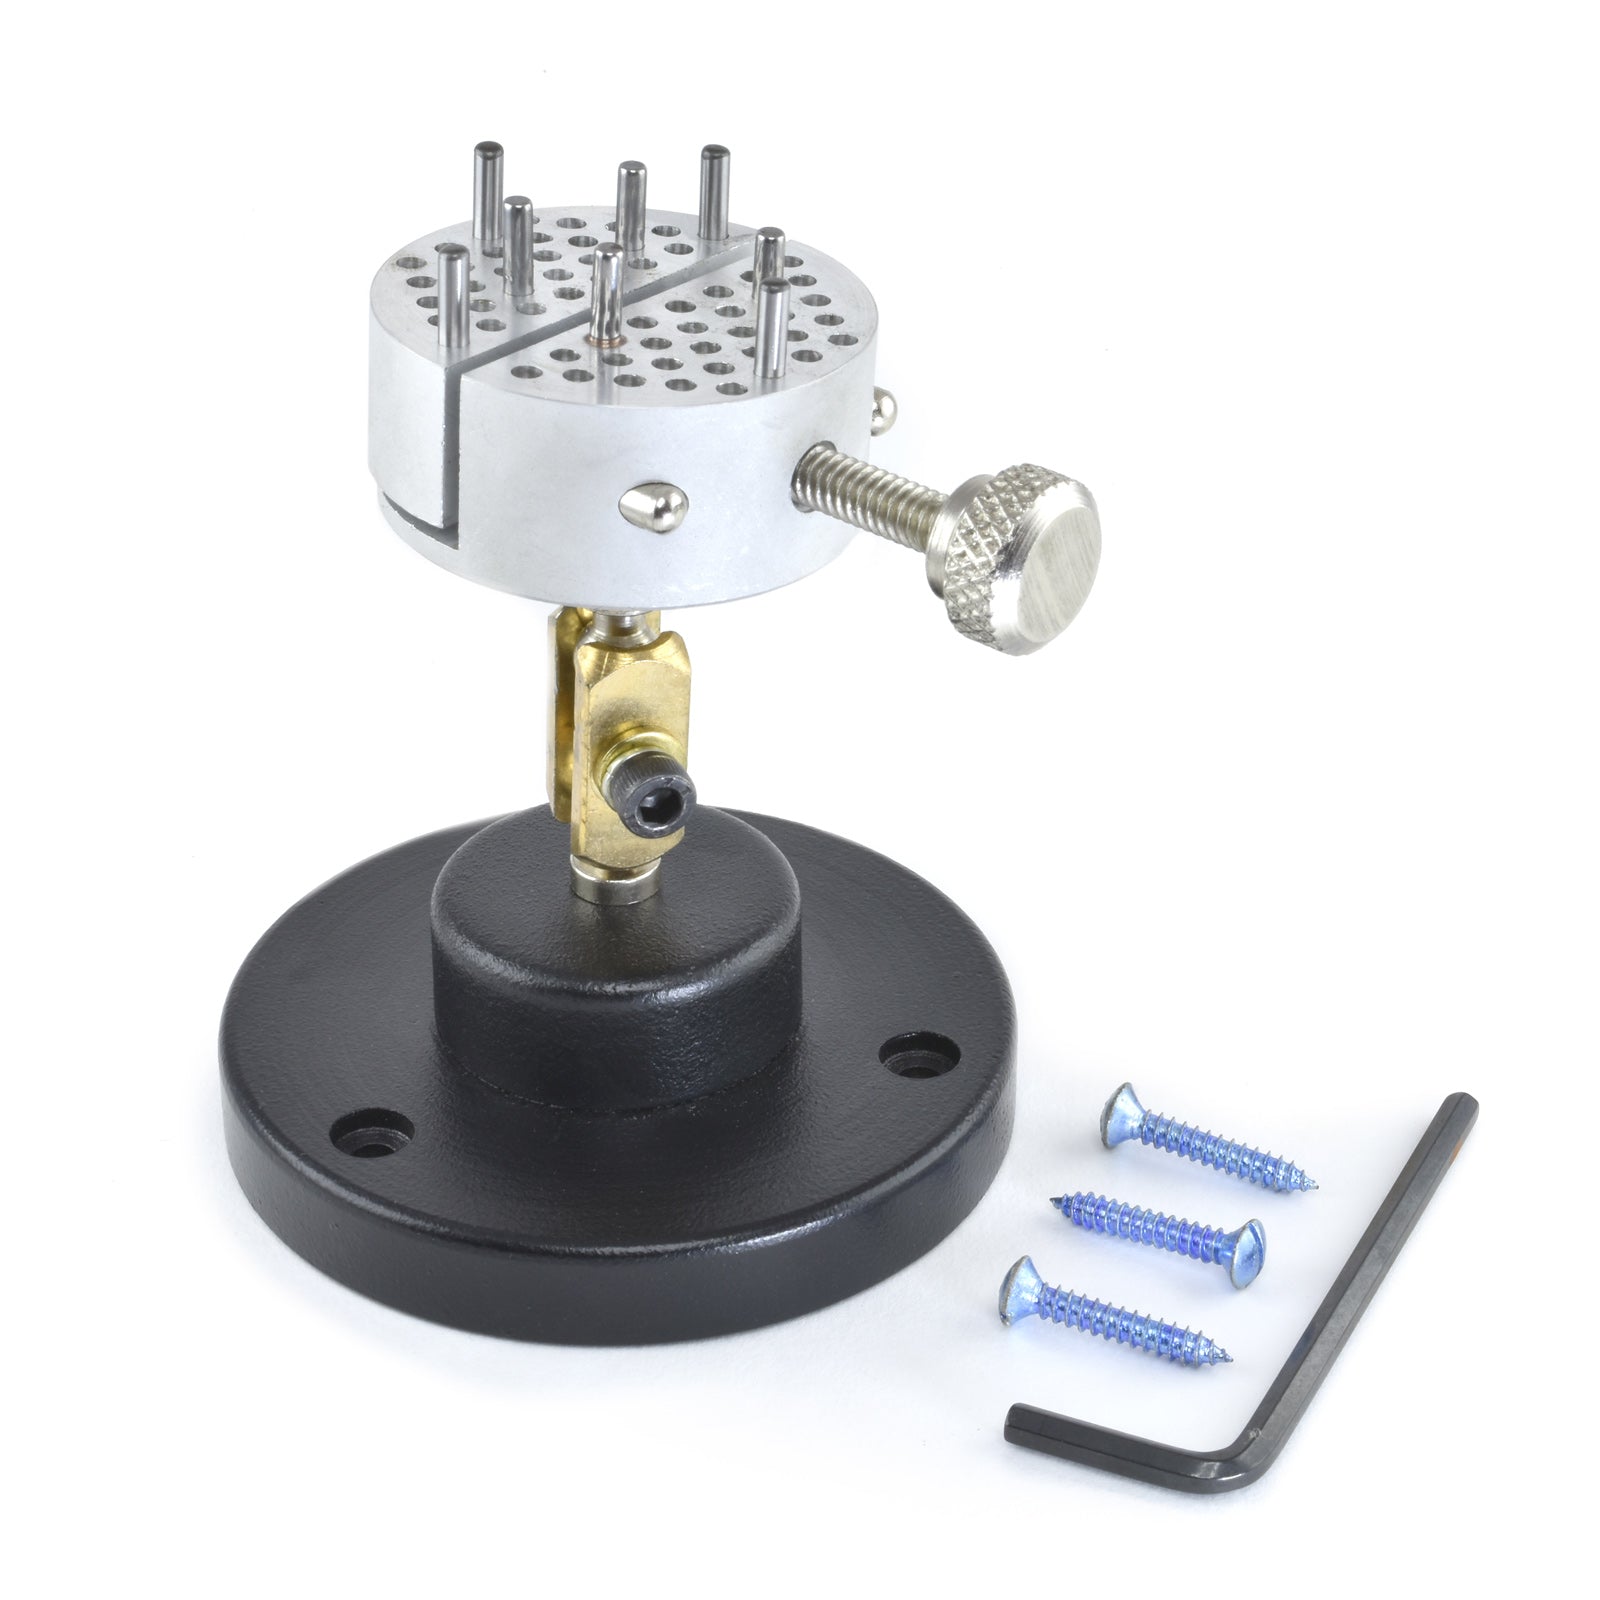 All - Position Universal Clamp with Base - Micro - Mark Vises